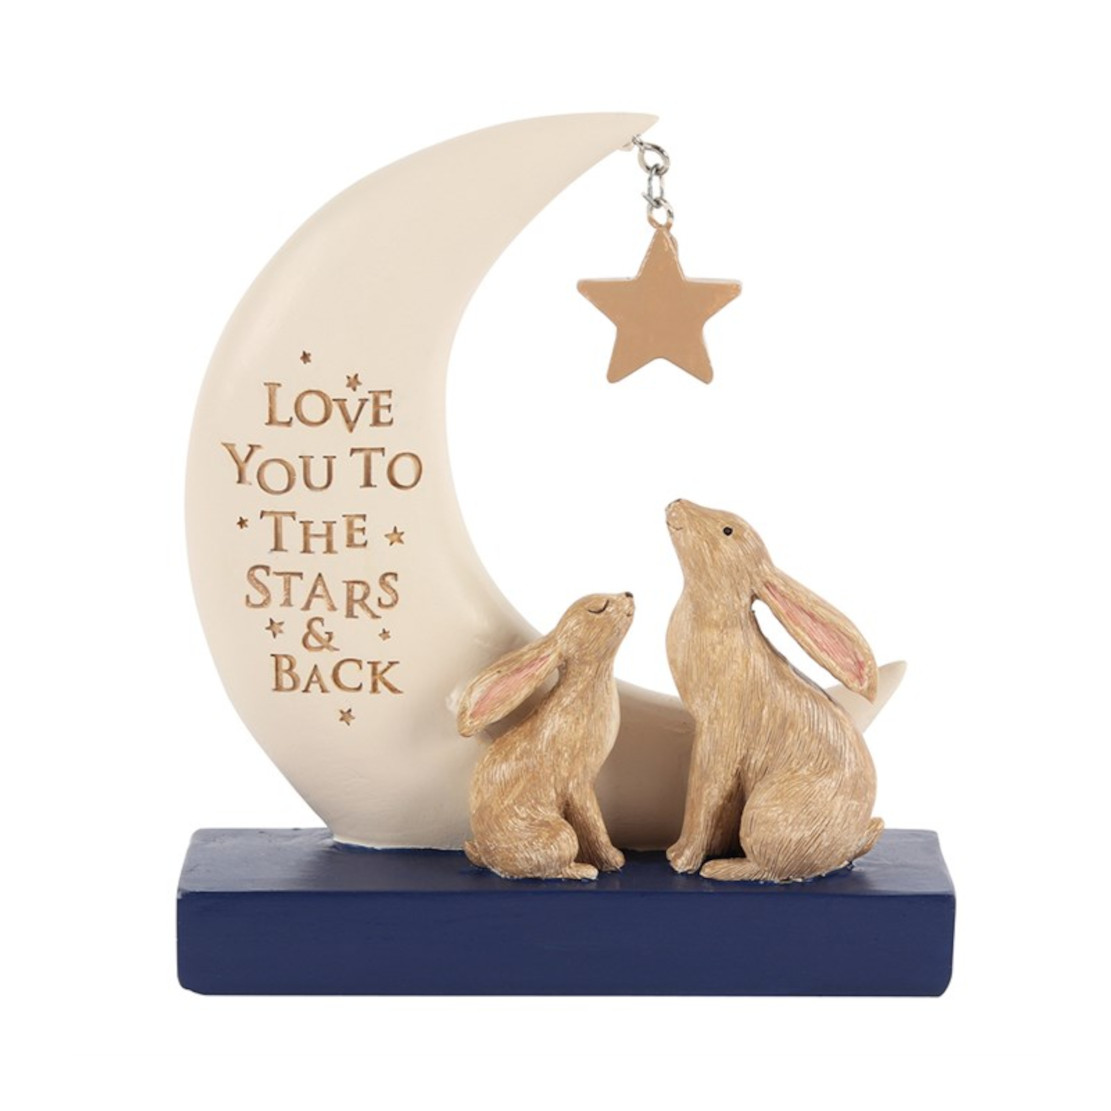 Love You To The Stars and Back Decorative Ornament